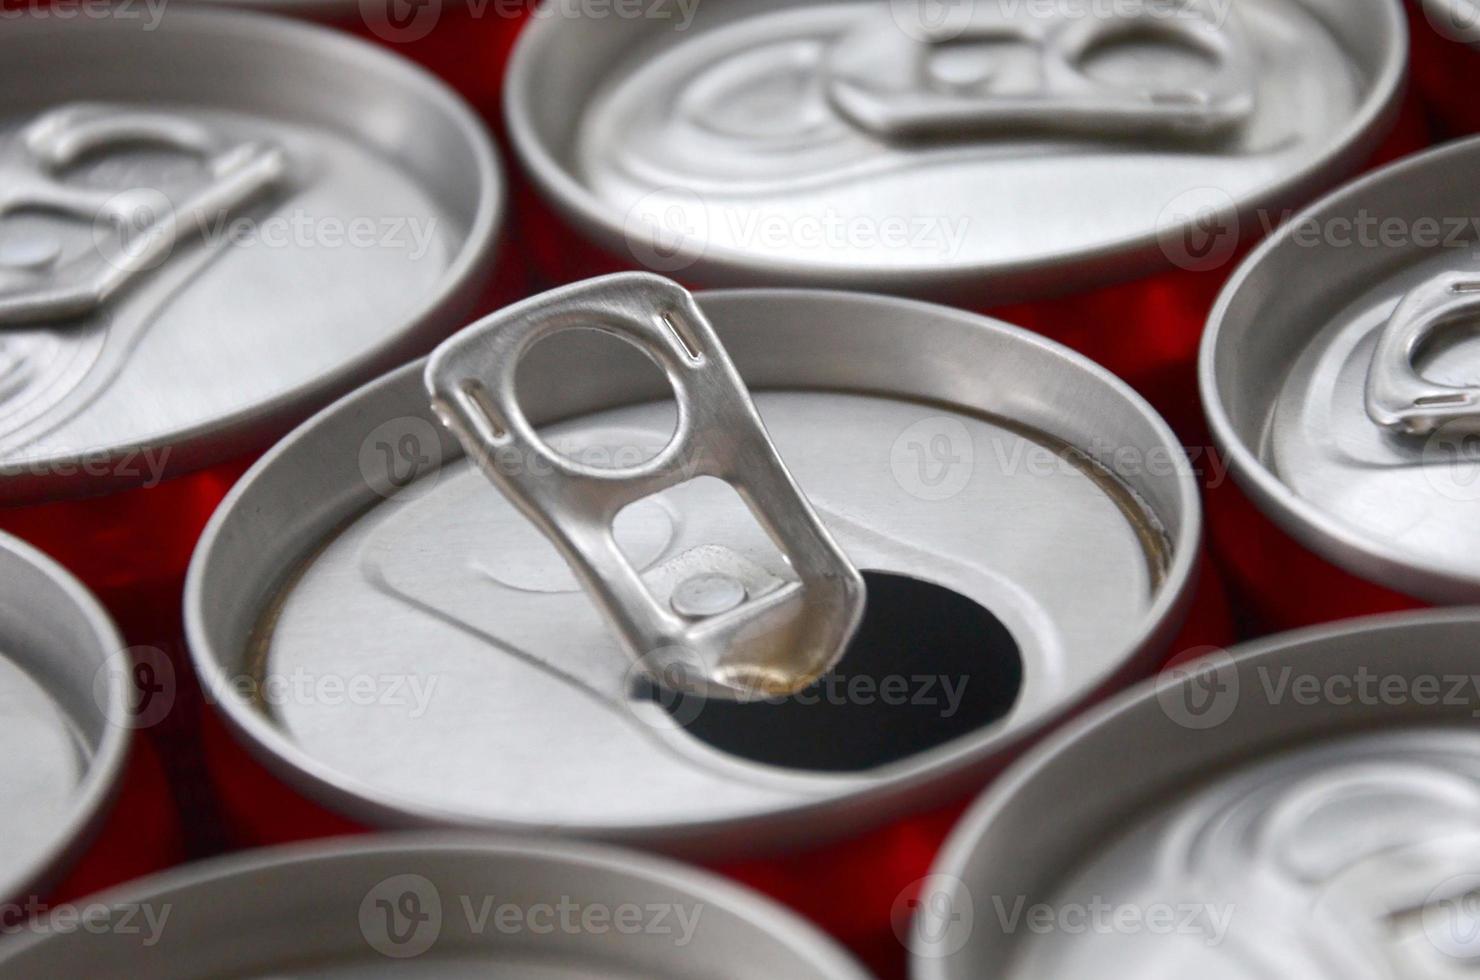 Many aluminium soda drink cans. Advertising for Soda drinks or tin cans mass manufacturing photo